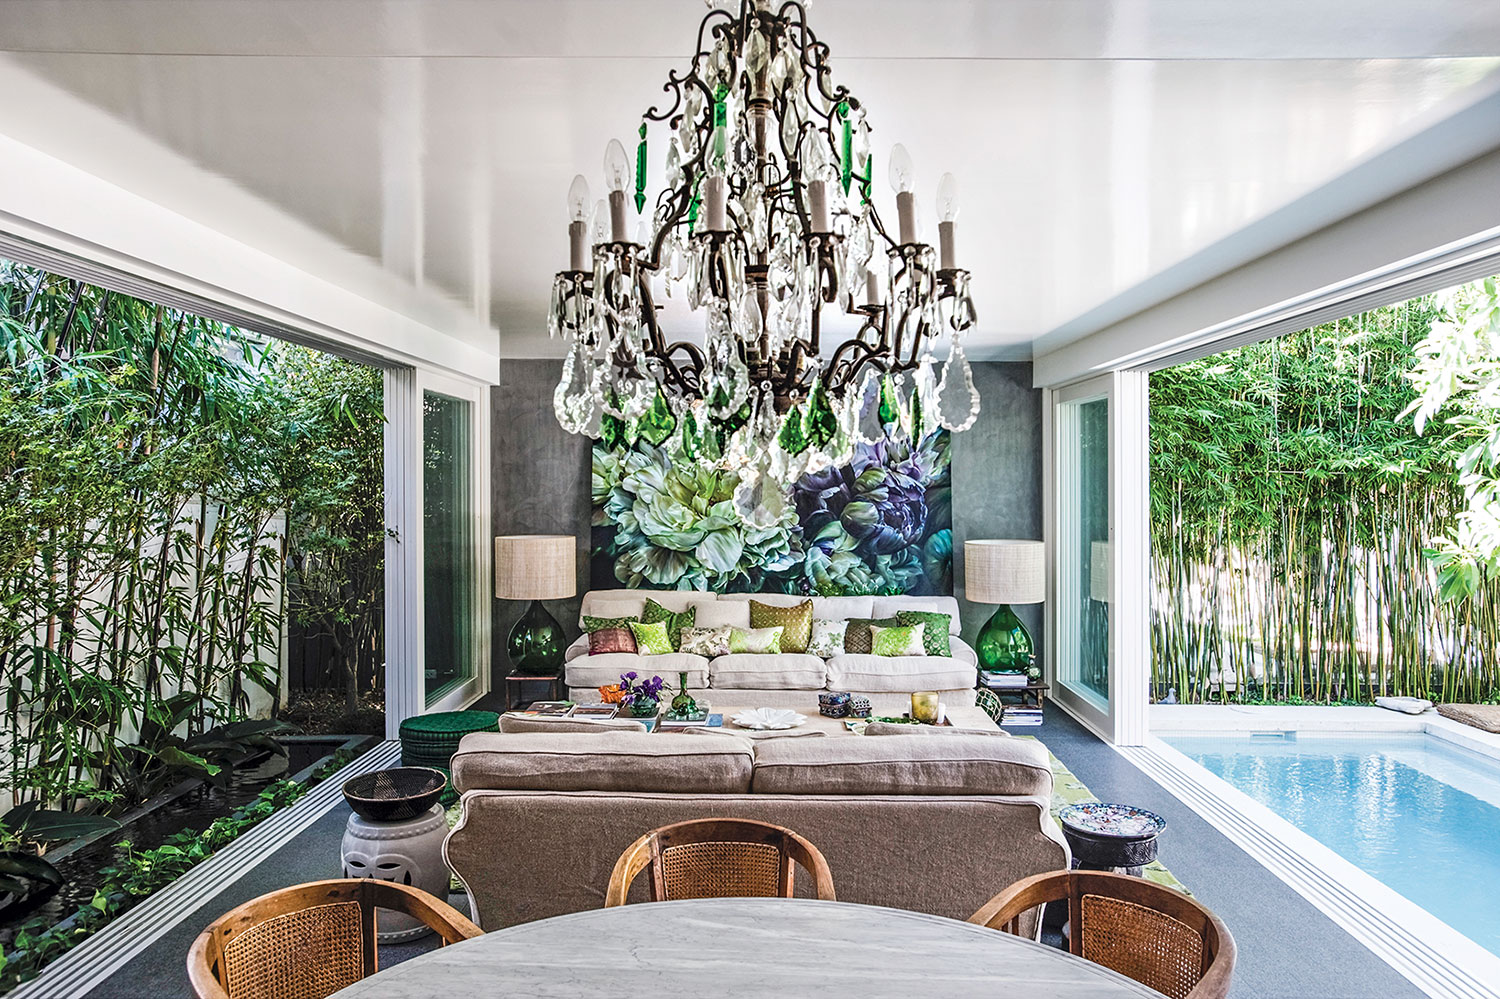 One of the home's indoor-outdoor living spaces, the open-air living room includes the dining table and chandelier, two sofas facing each other, and, on the back wall, a large floral painting by Marcella Kaspar.